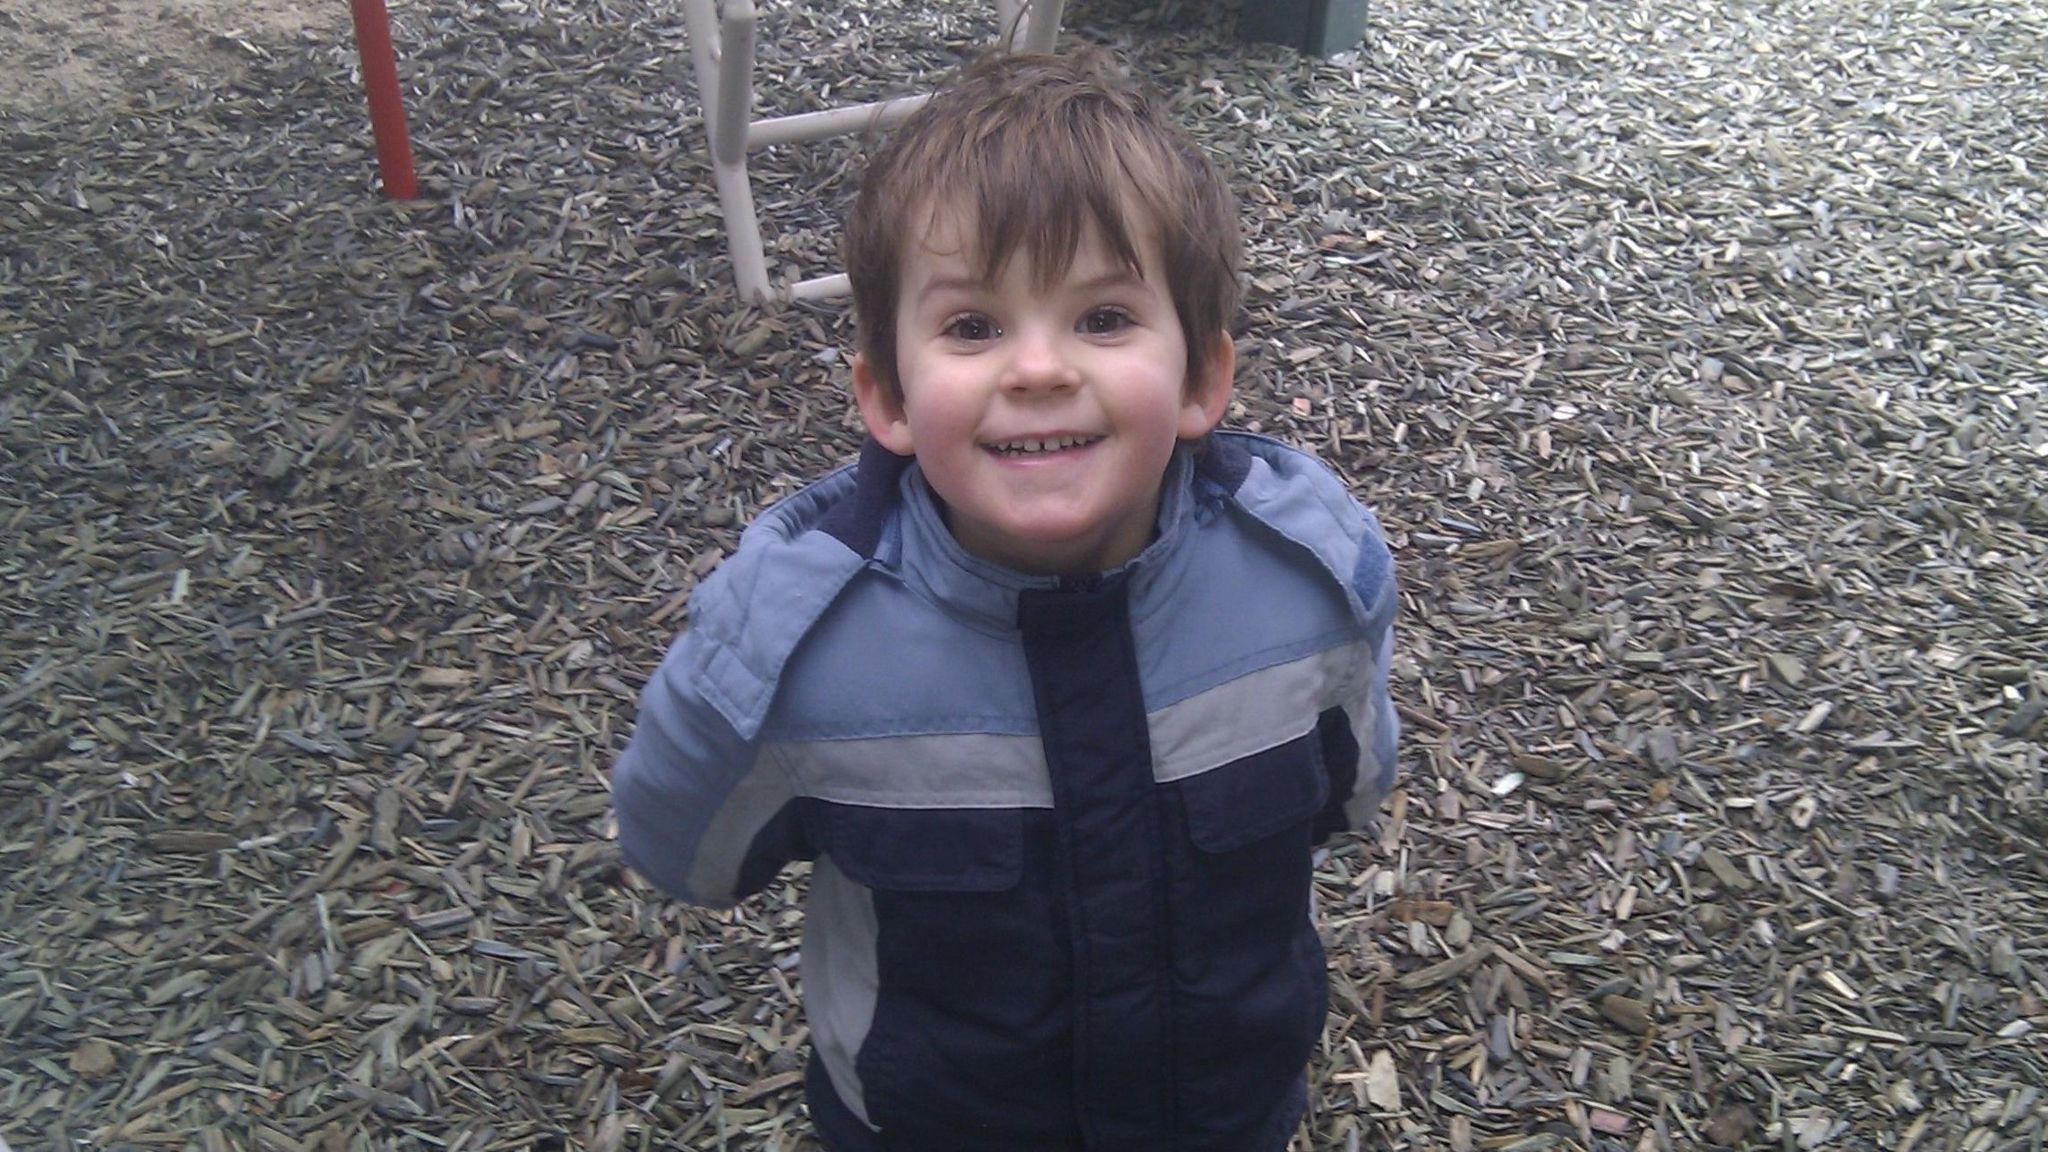 A young boy in a play area, smiling at the camera